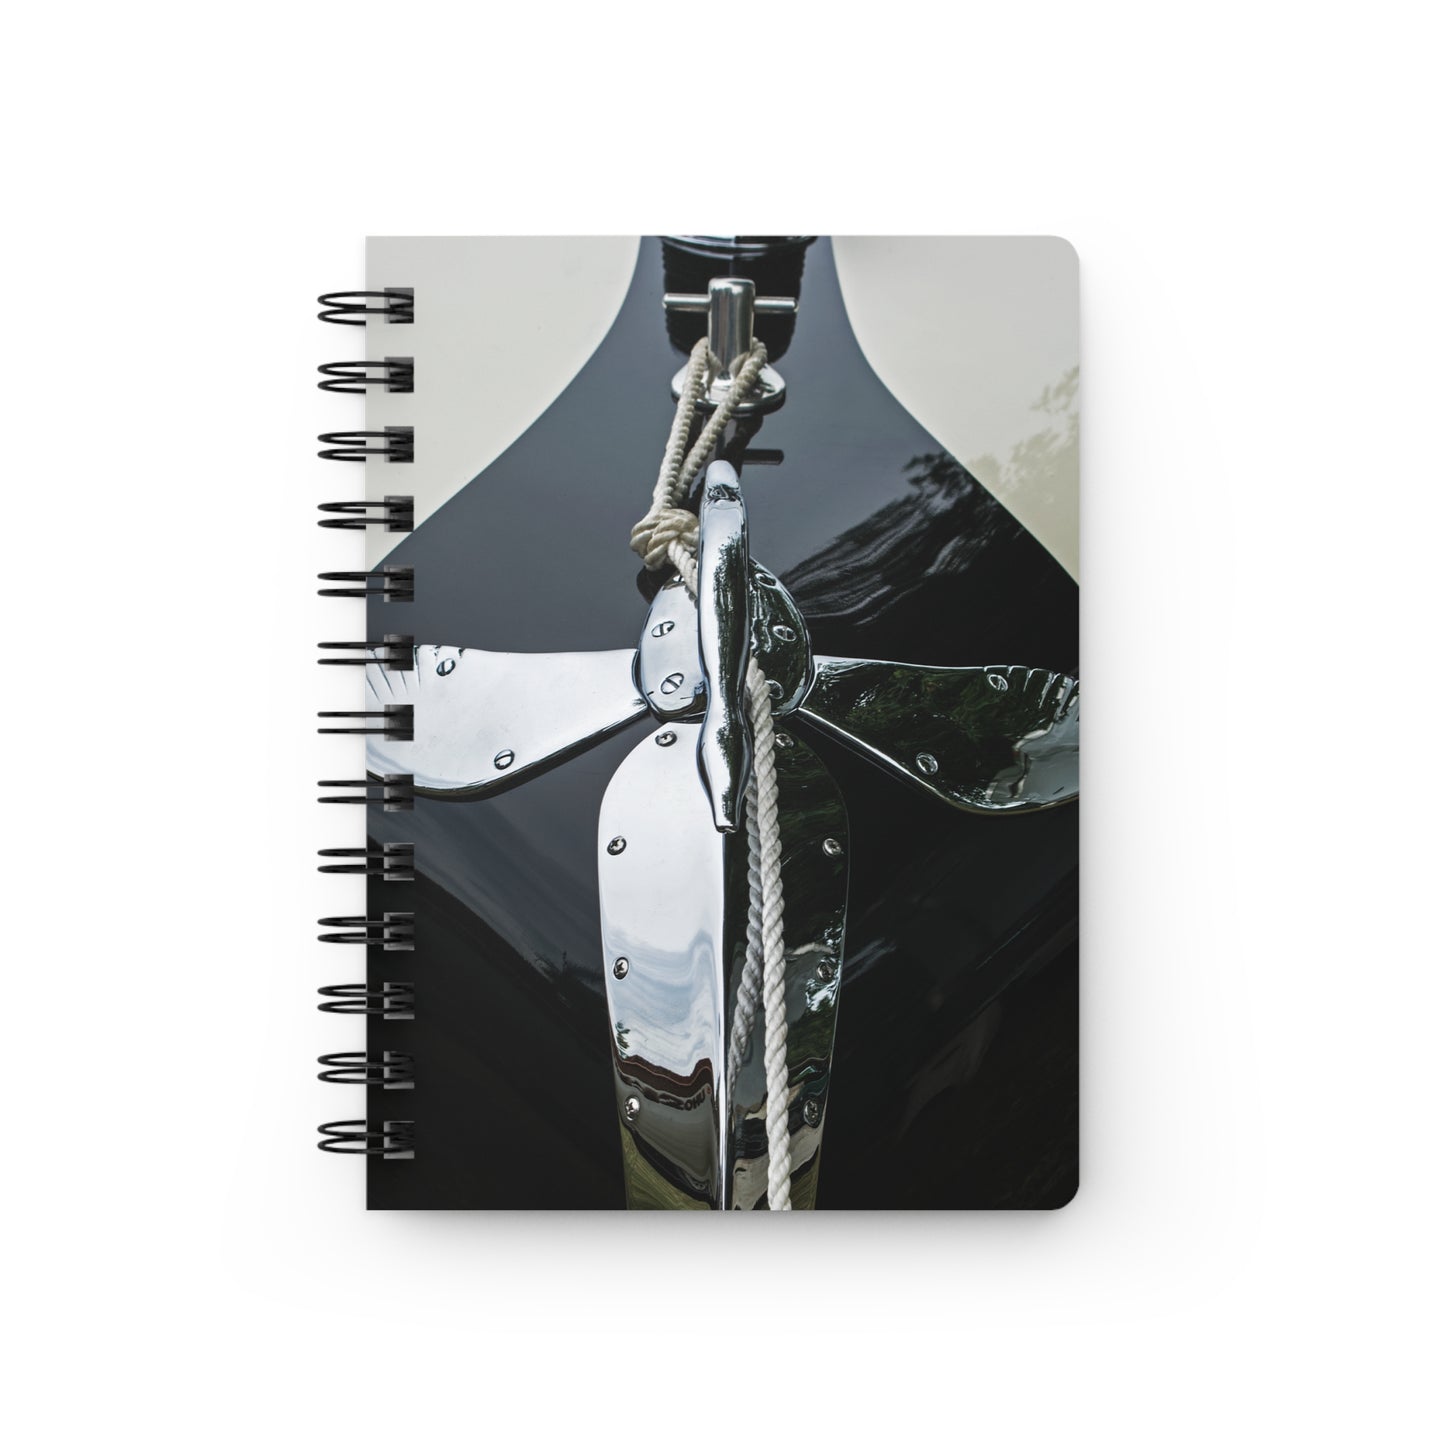 Boats 01 - Spiral Bound Journal One Size